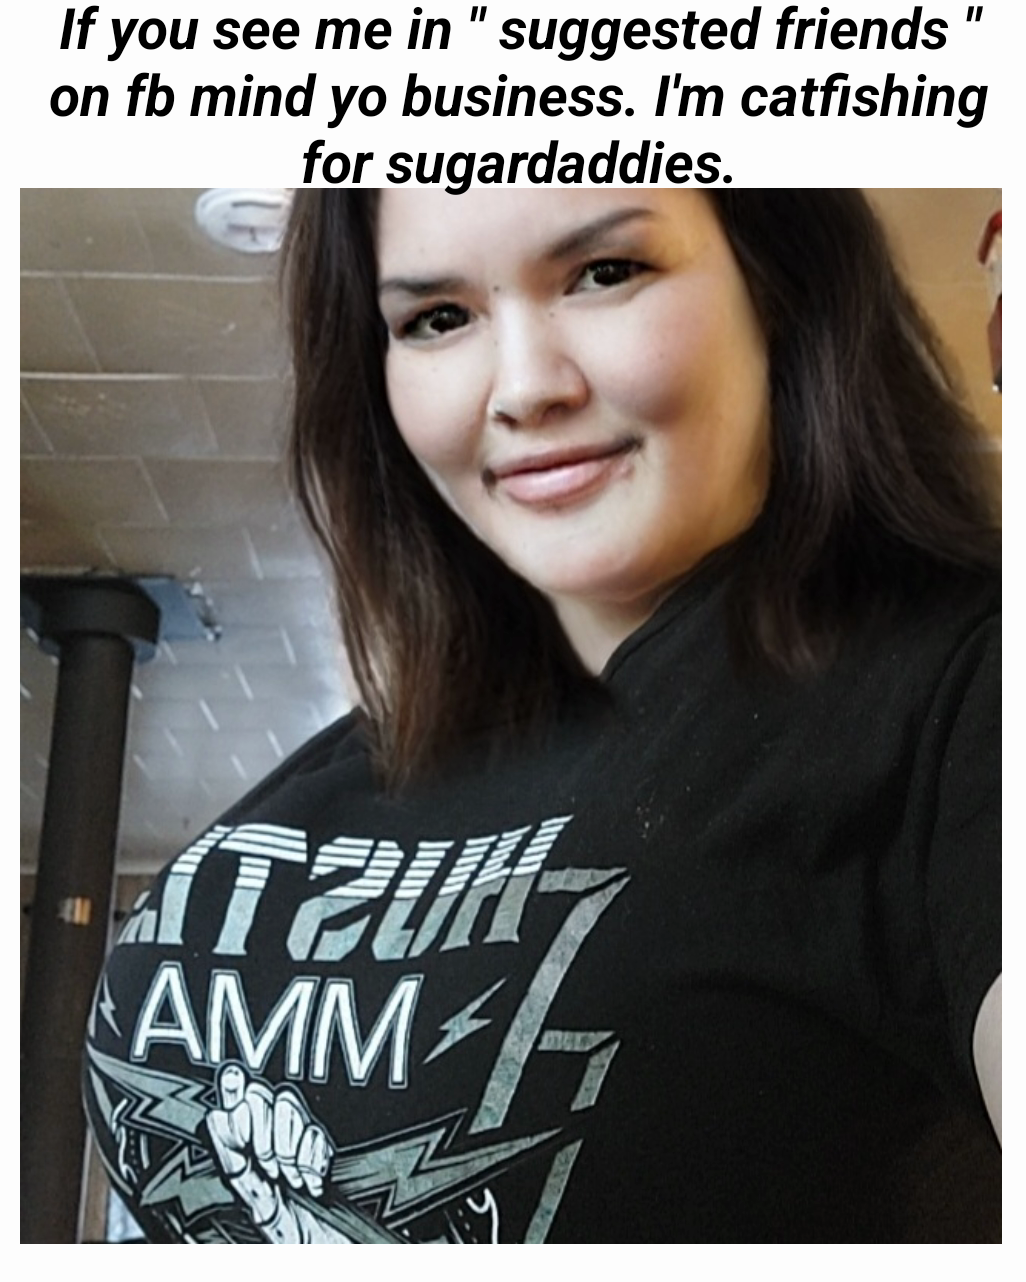 If you see me in " suggested friends " on fb mind yo business. I'm catfishing for sugardaddies.